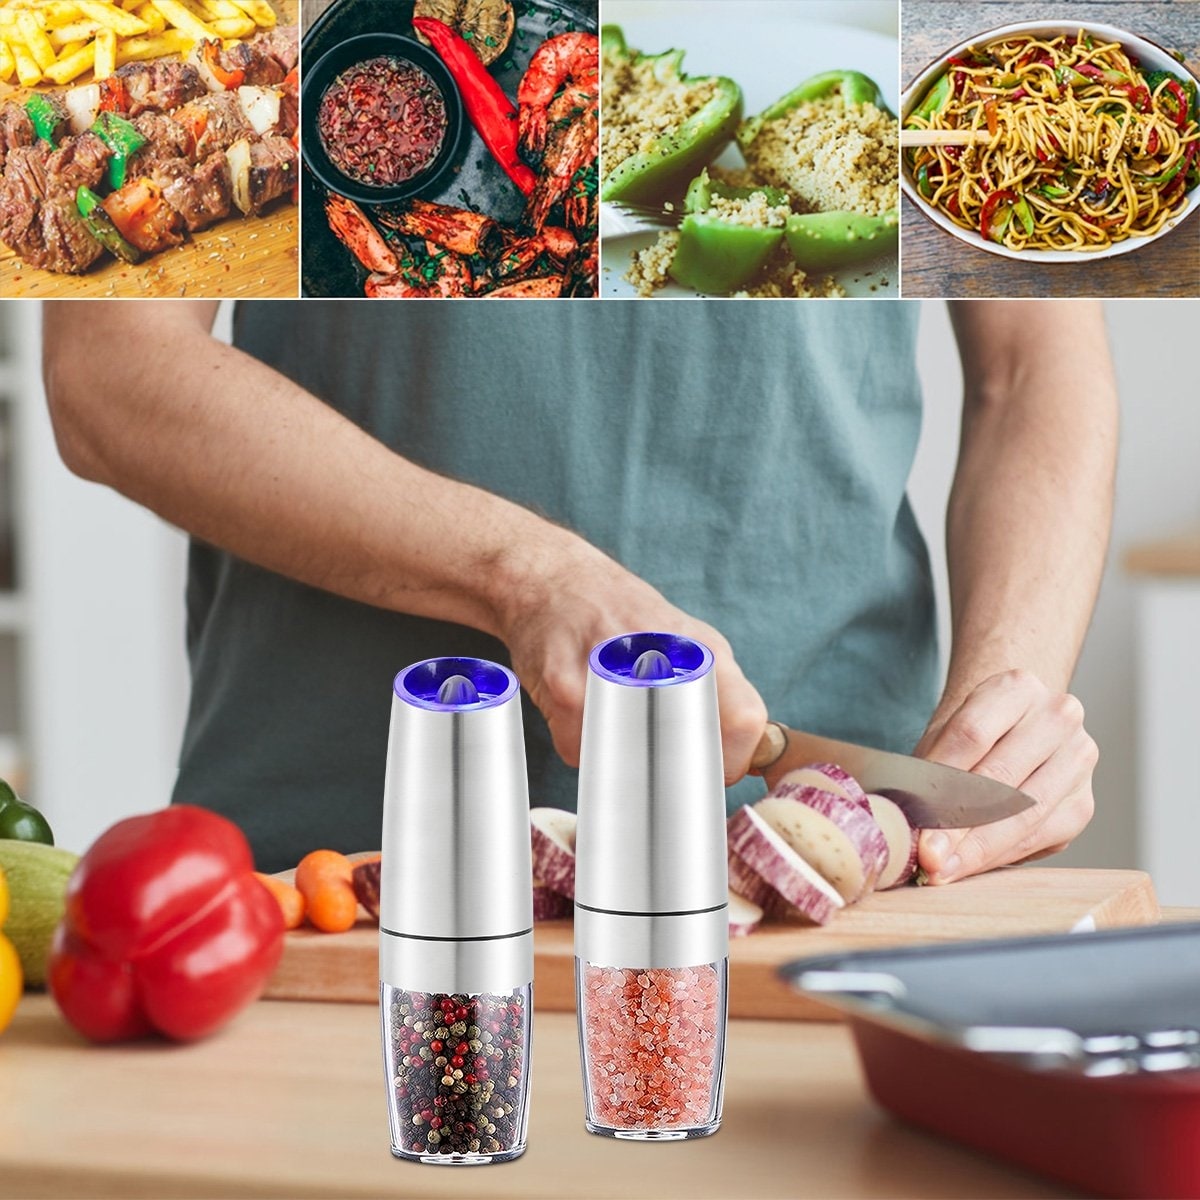 https://ak1.ostkcdn.com/images/products/is/images/direct/1ae178789c0de94acdfe2718e535059796a6c85d/Electric-salt-and-pepper-grinder.jpg